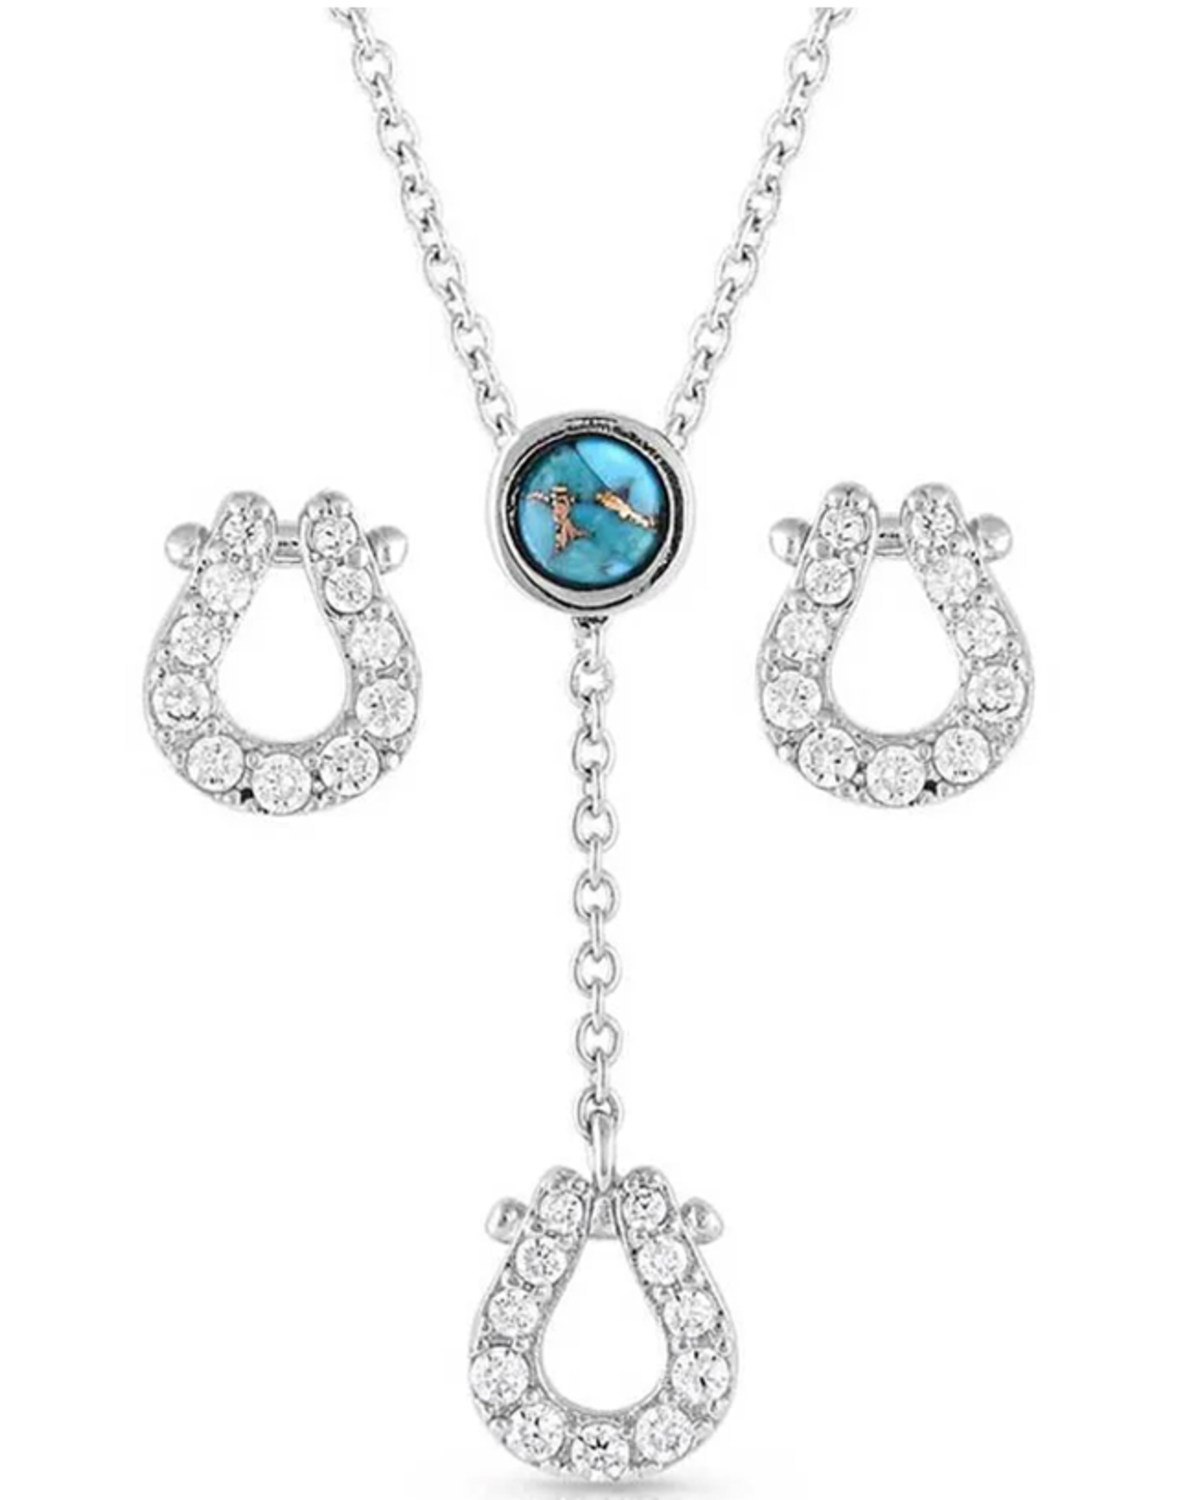 Montana Silversmiths Women's Infinite Luck Turquoise Stone Earring & Necklace Set - 2-Piece